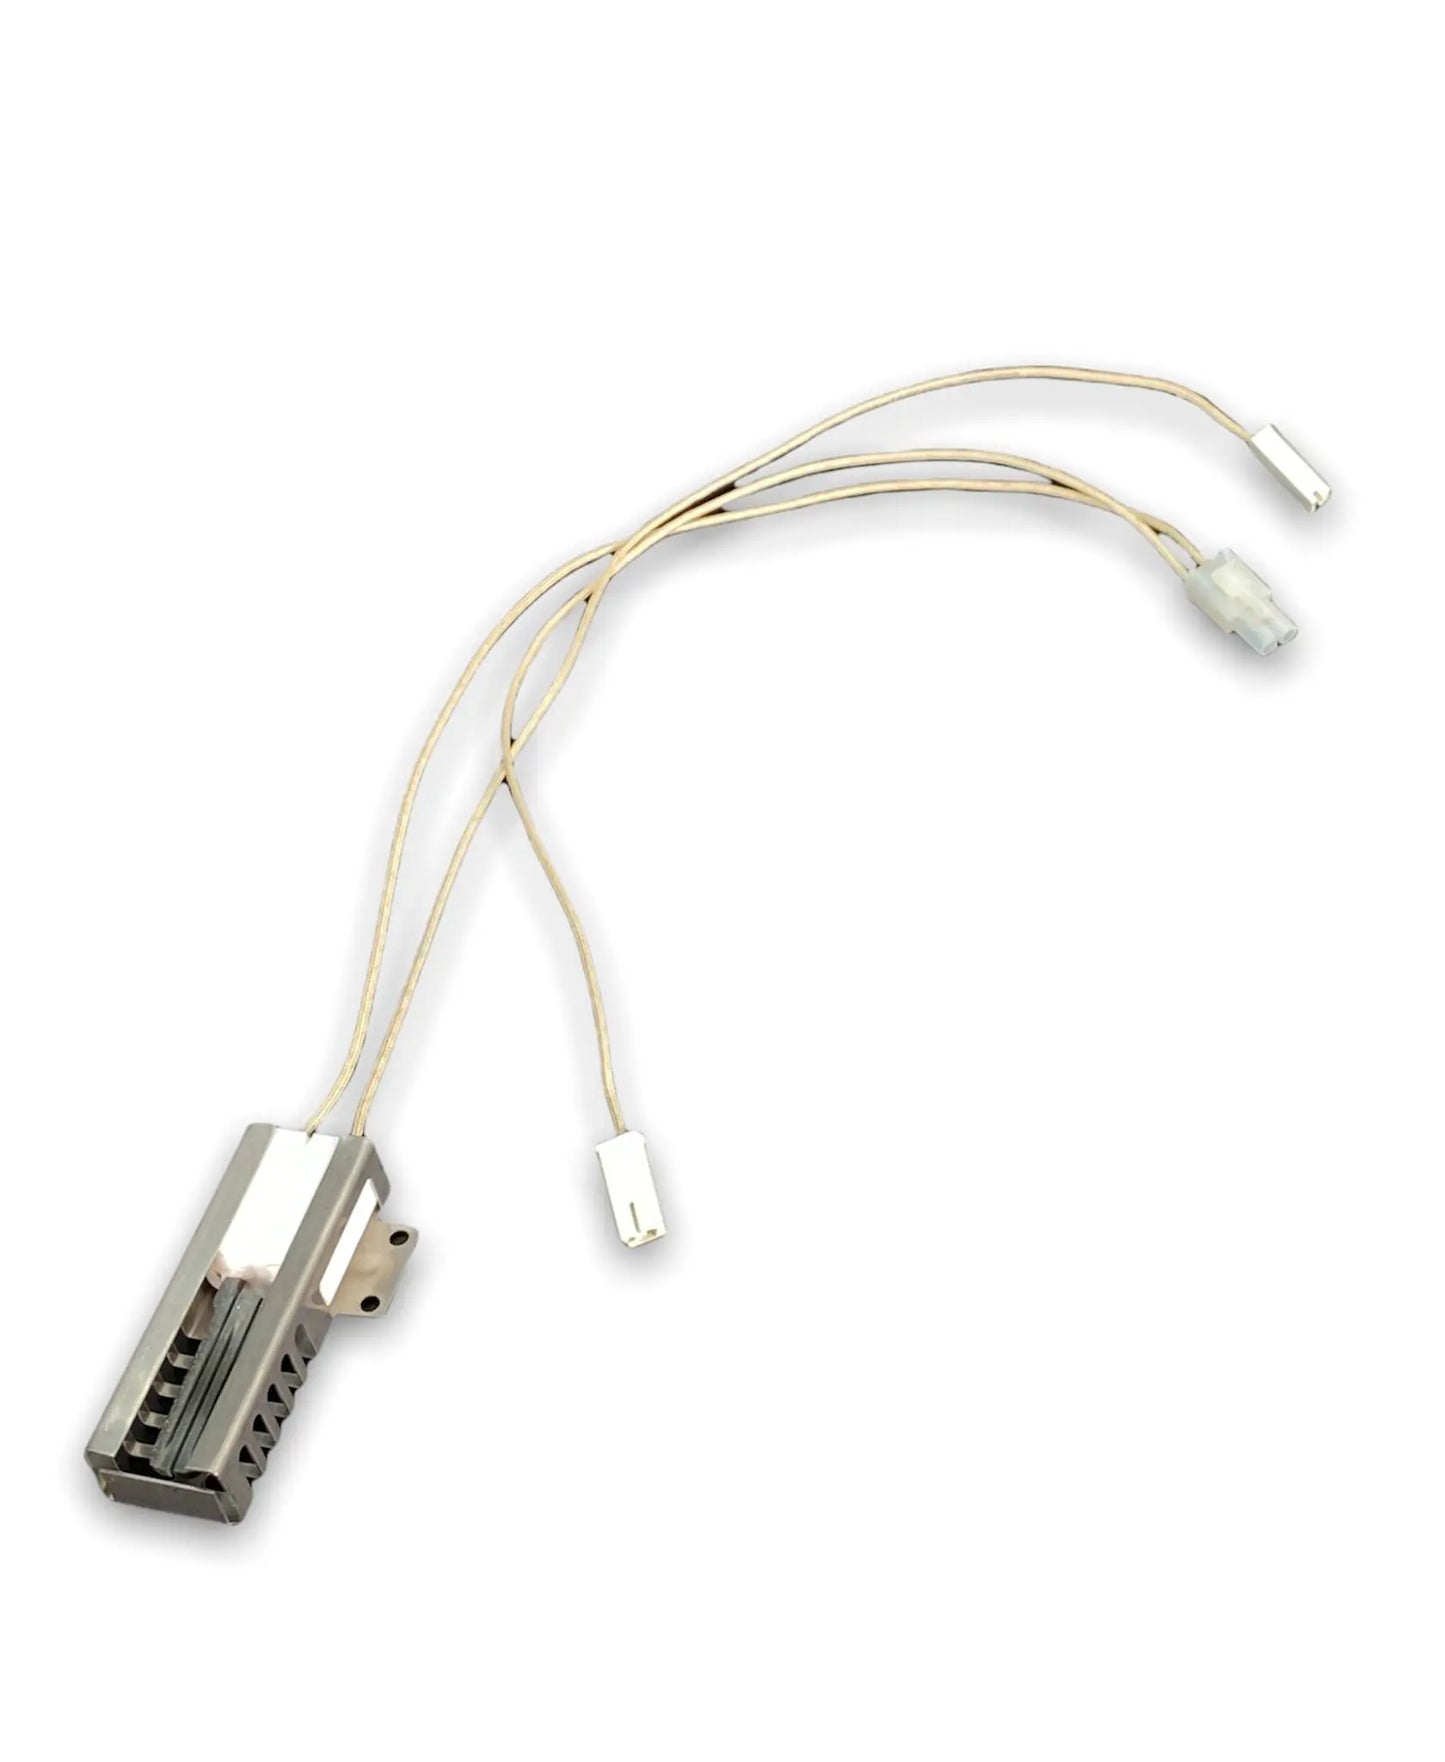 Electrolux Range Flat Gas Igniter, Hot Surface - 5304509706 or 316489408, REPLACES: 316119301 316489402 316489408 PD00035904 4545981 AP6230715 PS12071409 EAP12071409 INVERTEC